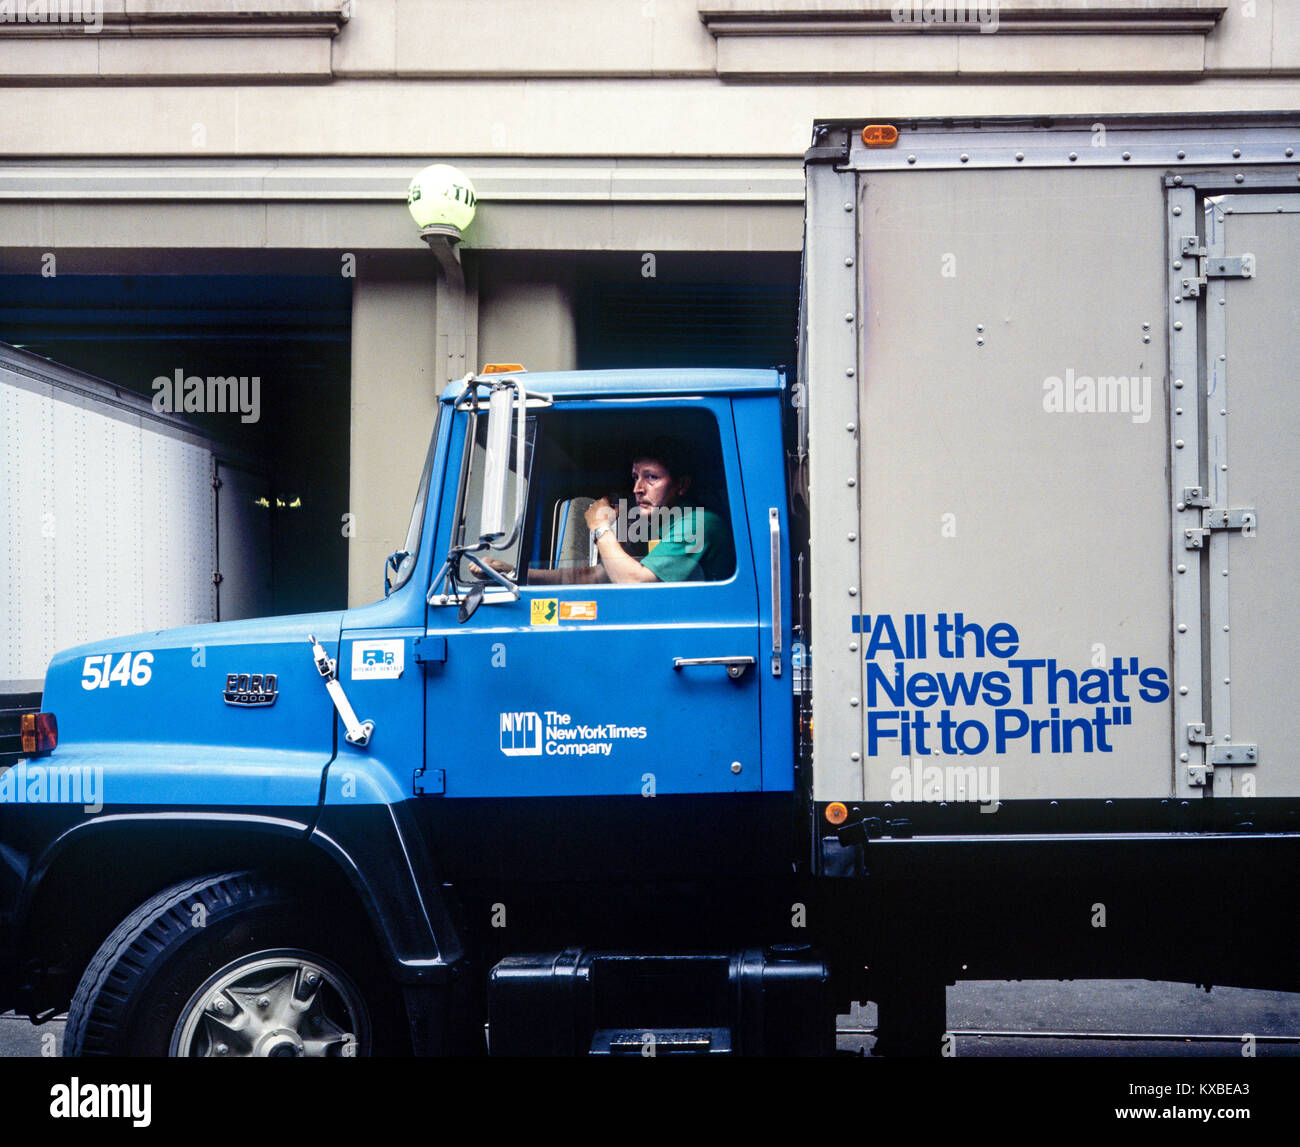 New York 1980s, The New York Times newspaper delivery truck driver waiting, 229 West 43rd street, Manhattan, New York City, NY, NYC, USA, Stock Photo